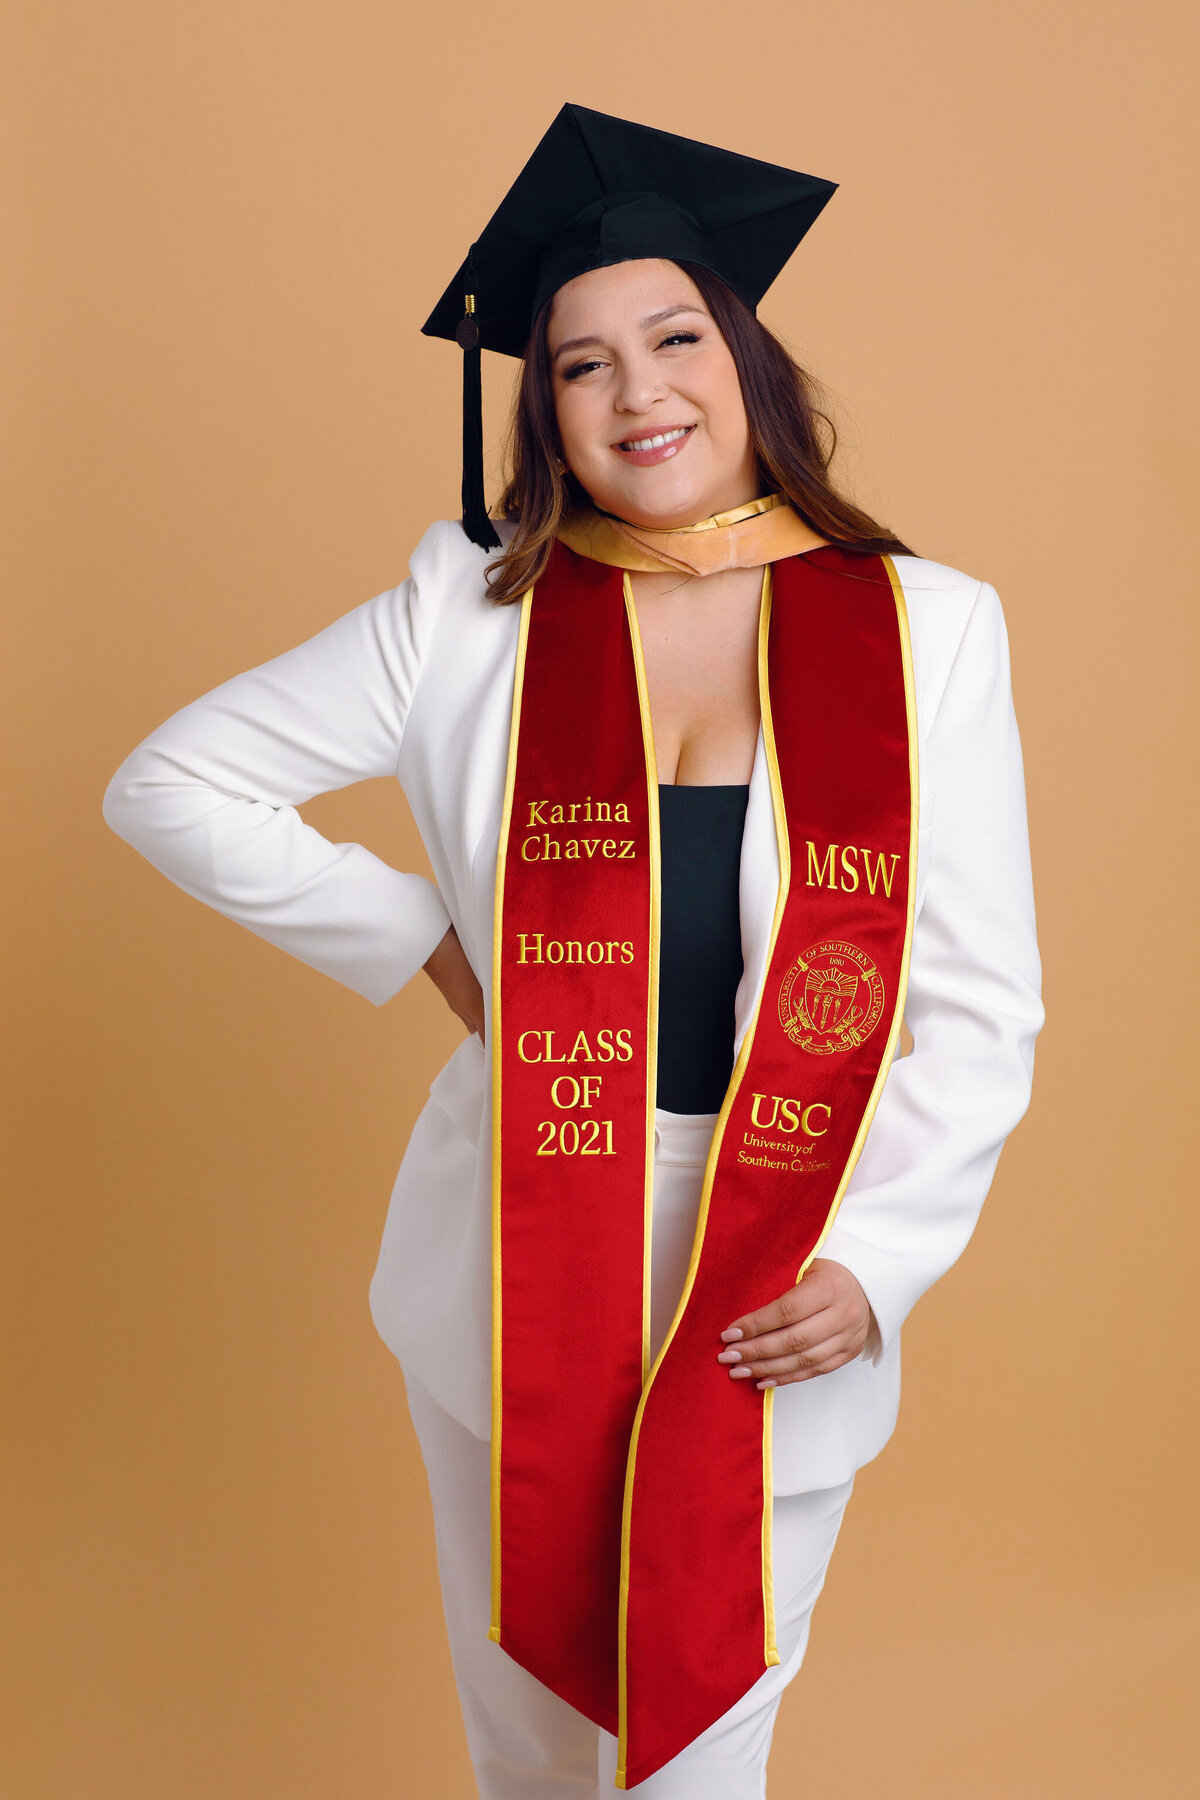 Graduation Portrait Of Young Woman In White Suit And Black Tube Los Angeles